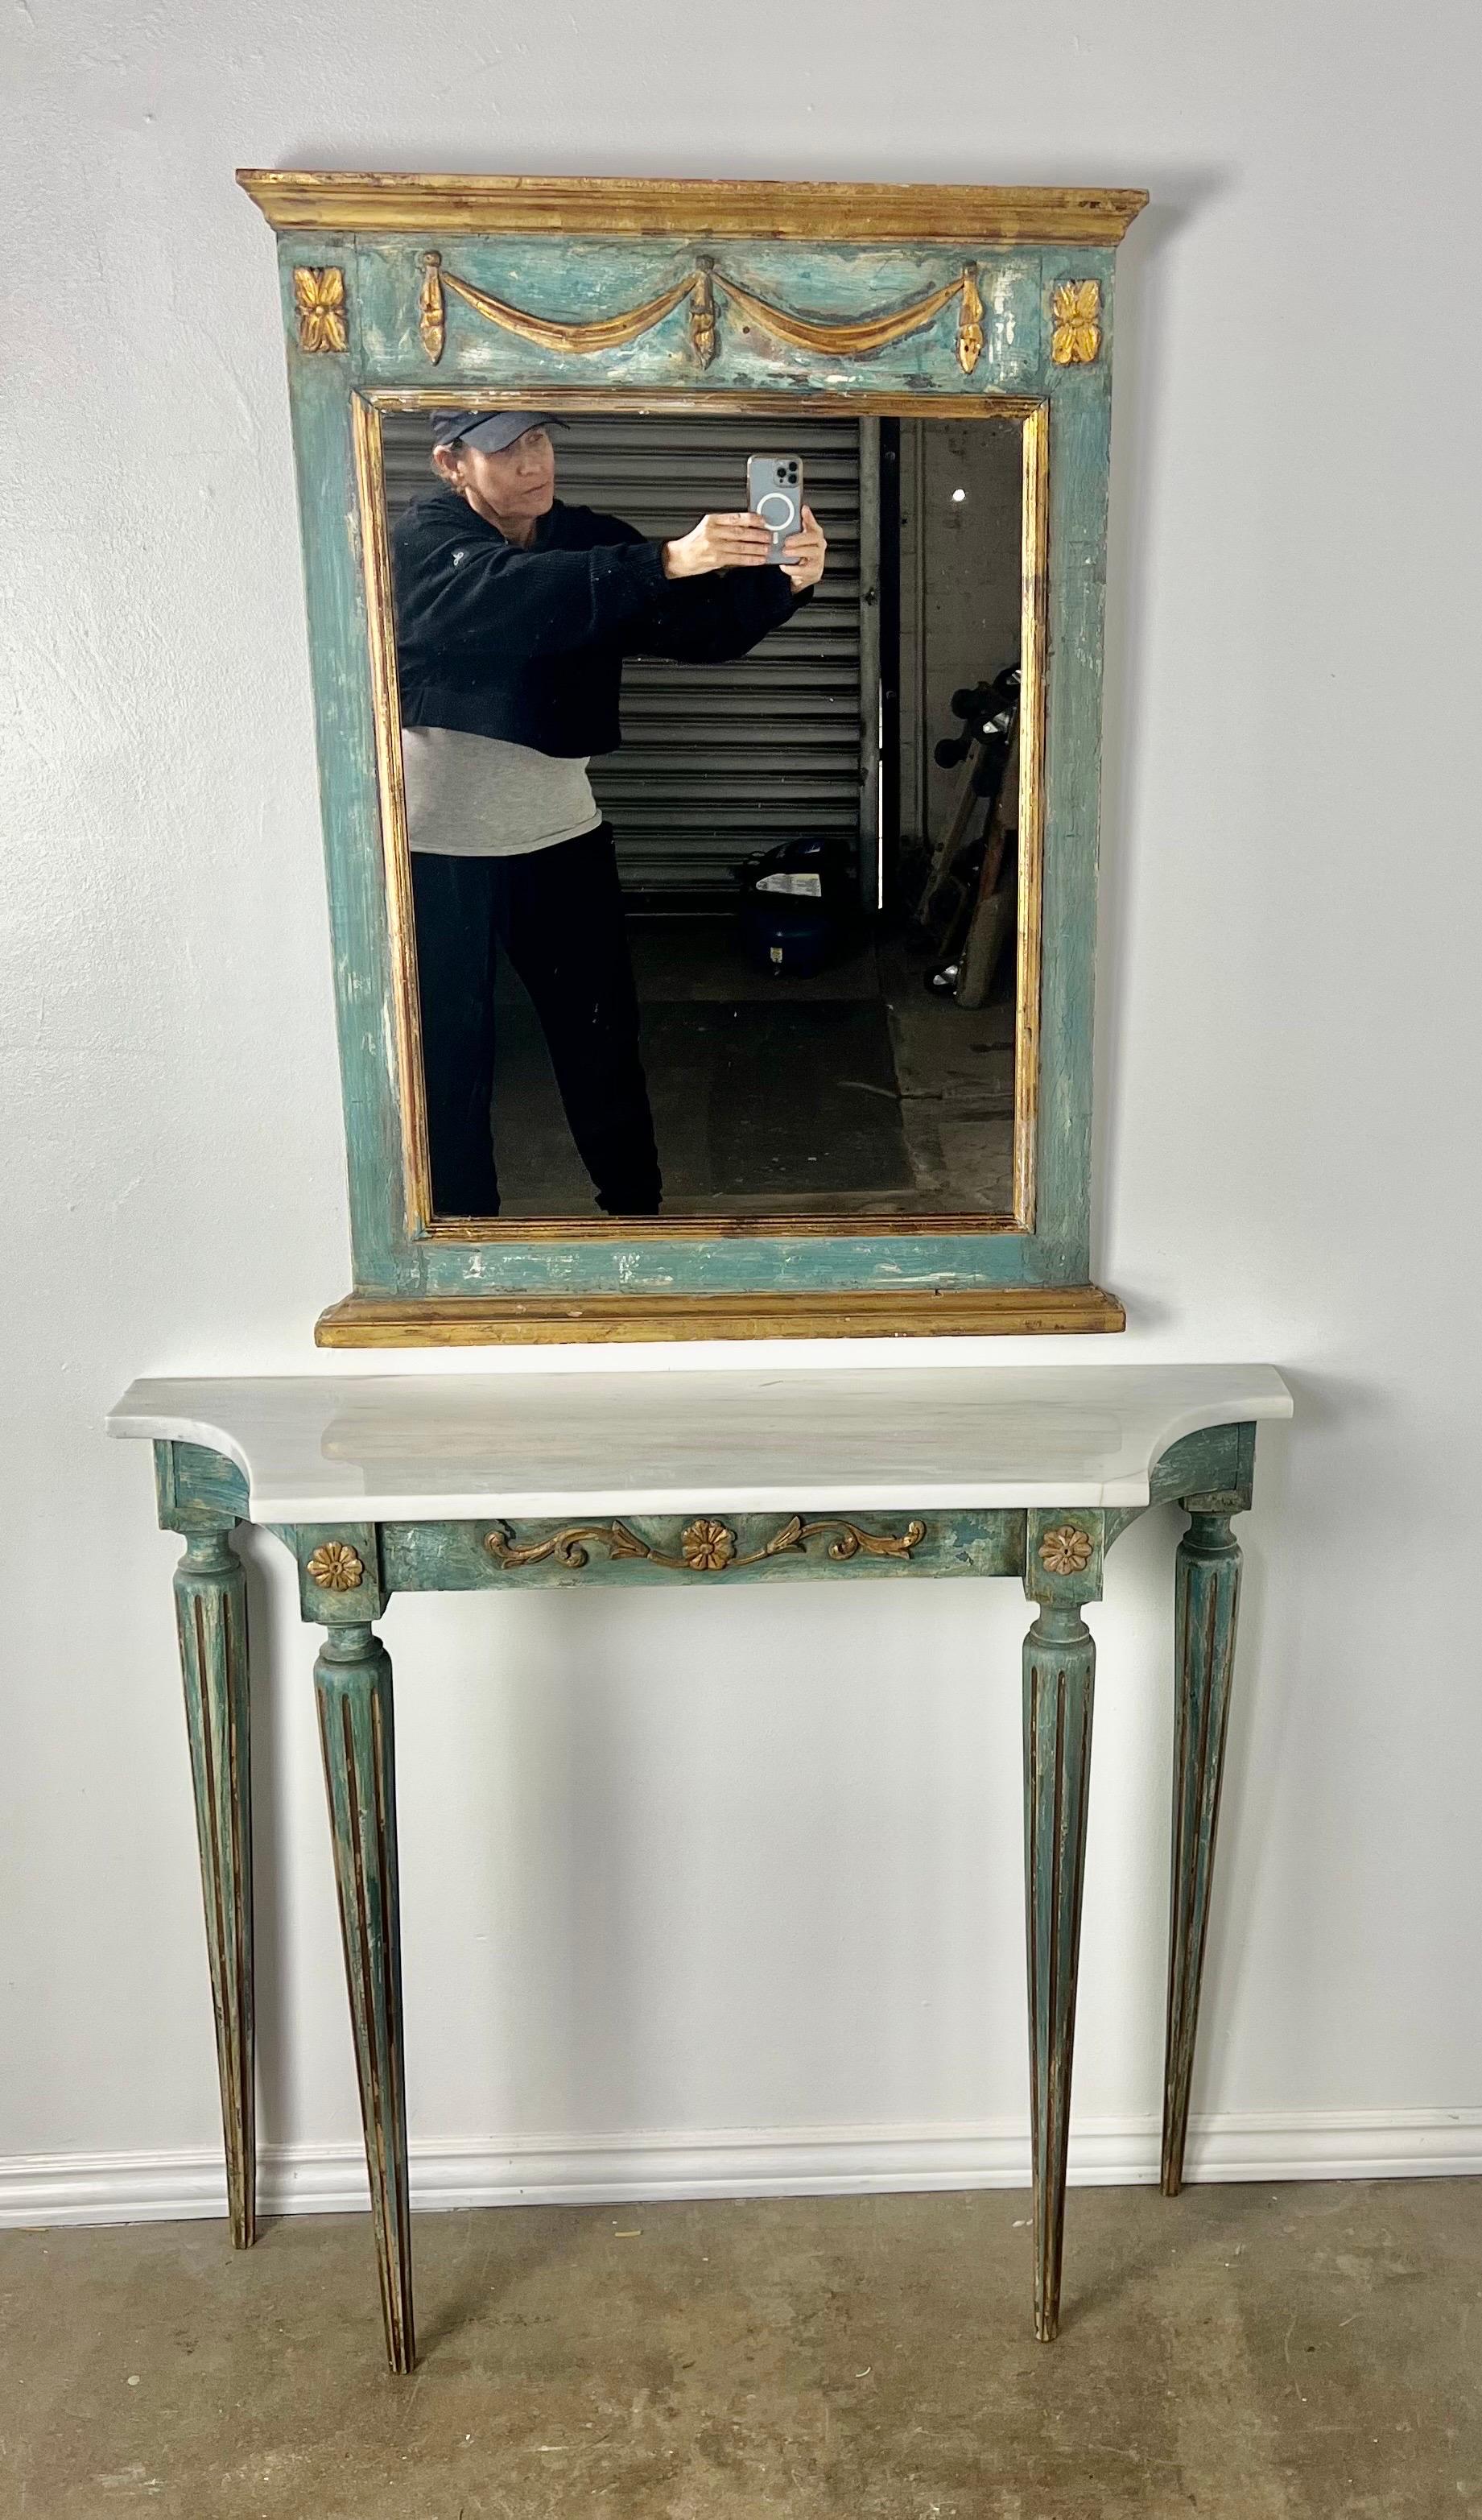 1930s Italian painted console w/ matching mirror. The console stands on four fluted legs and has a stone top. They are painted in a blue-green coloration. The paint is nicely worn exposing the gesso underneath. 

Size of Console-37